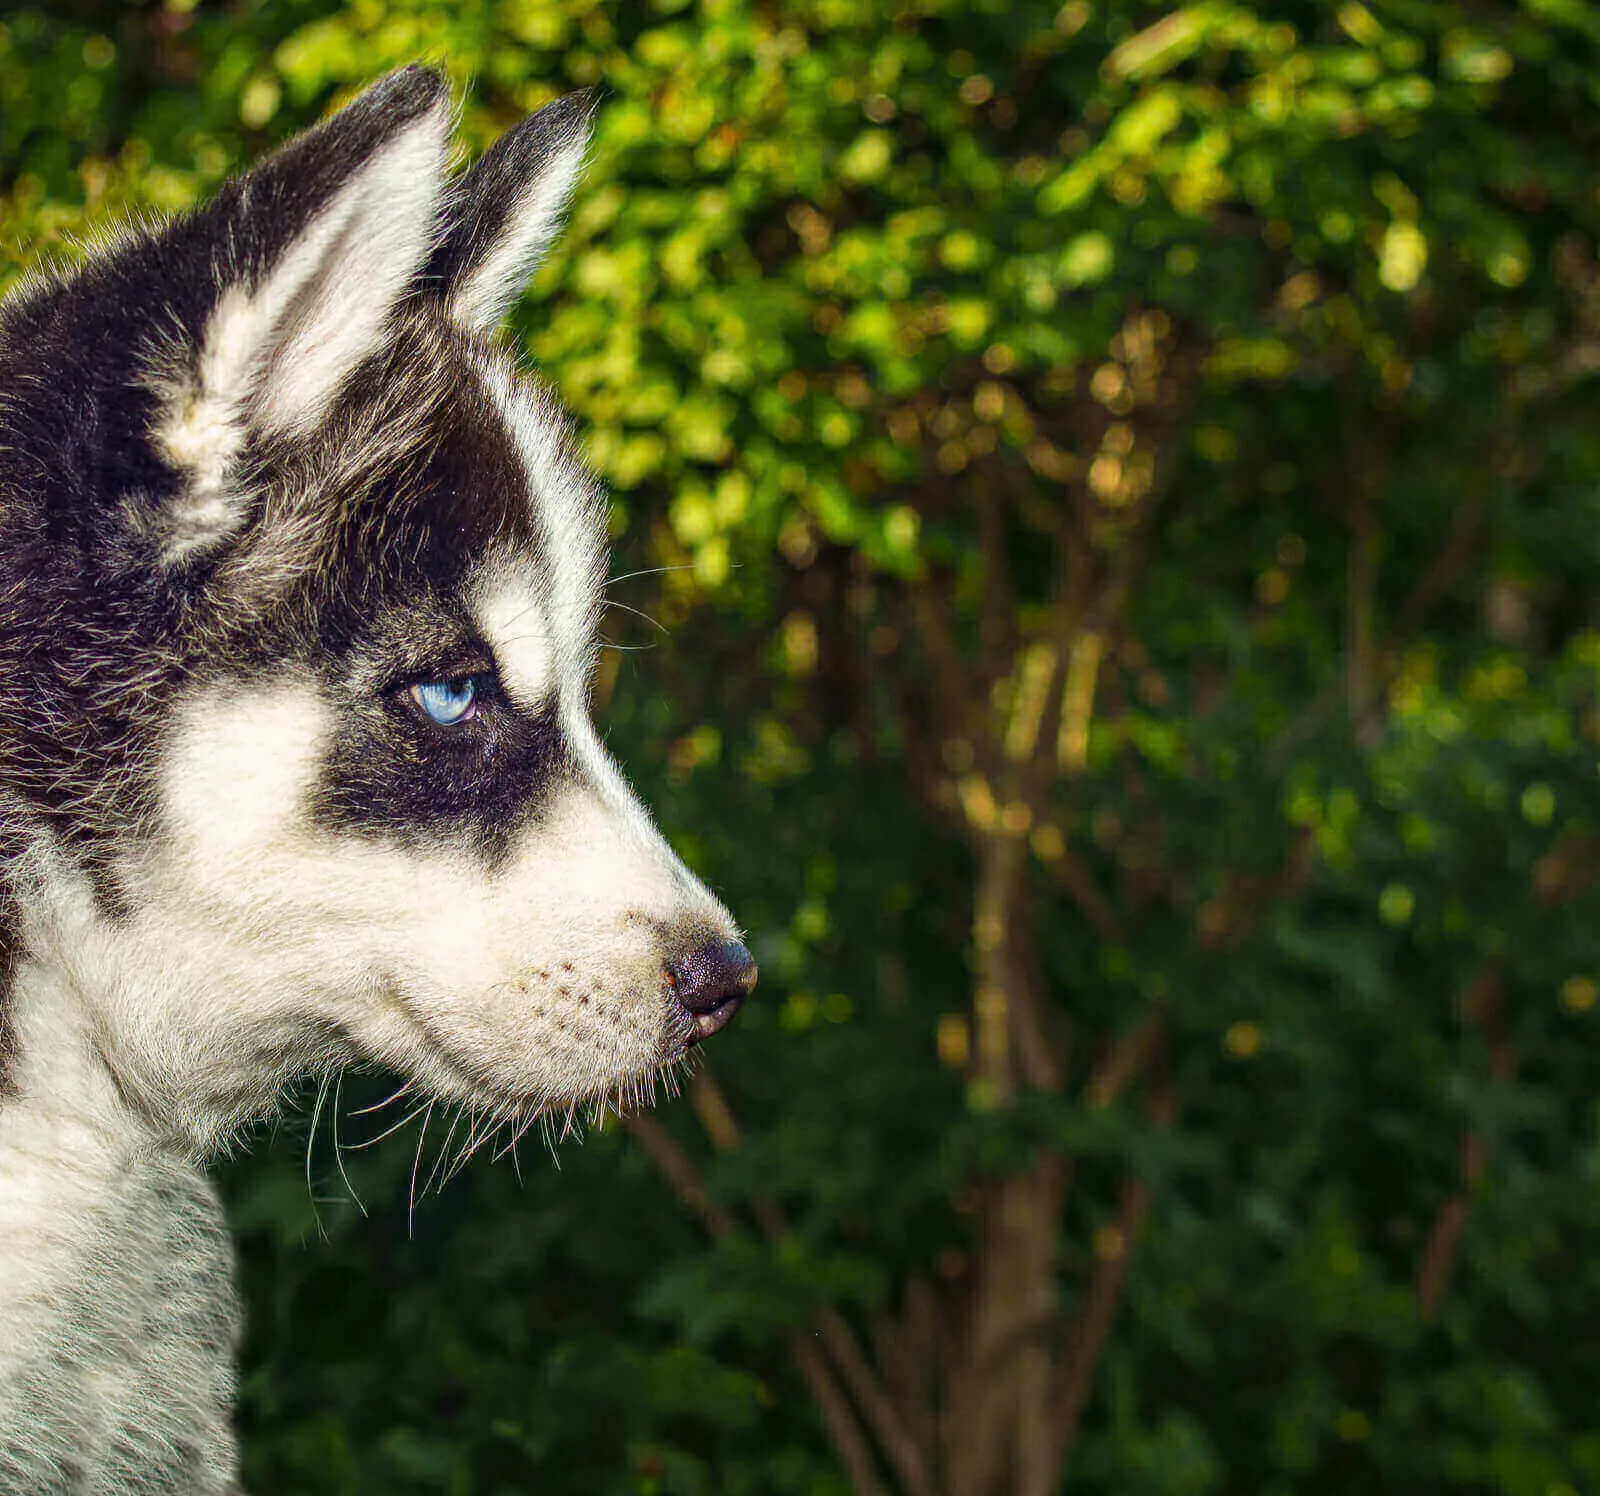 Why Is My Husky So Small? 5 Cool Tips To Get Husky Grow Fast